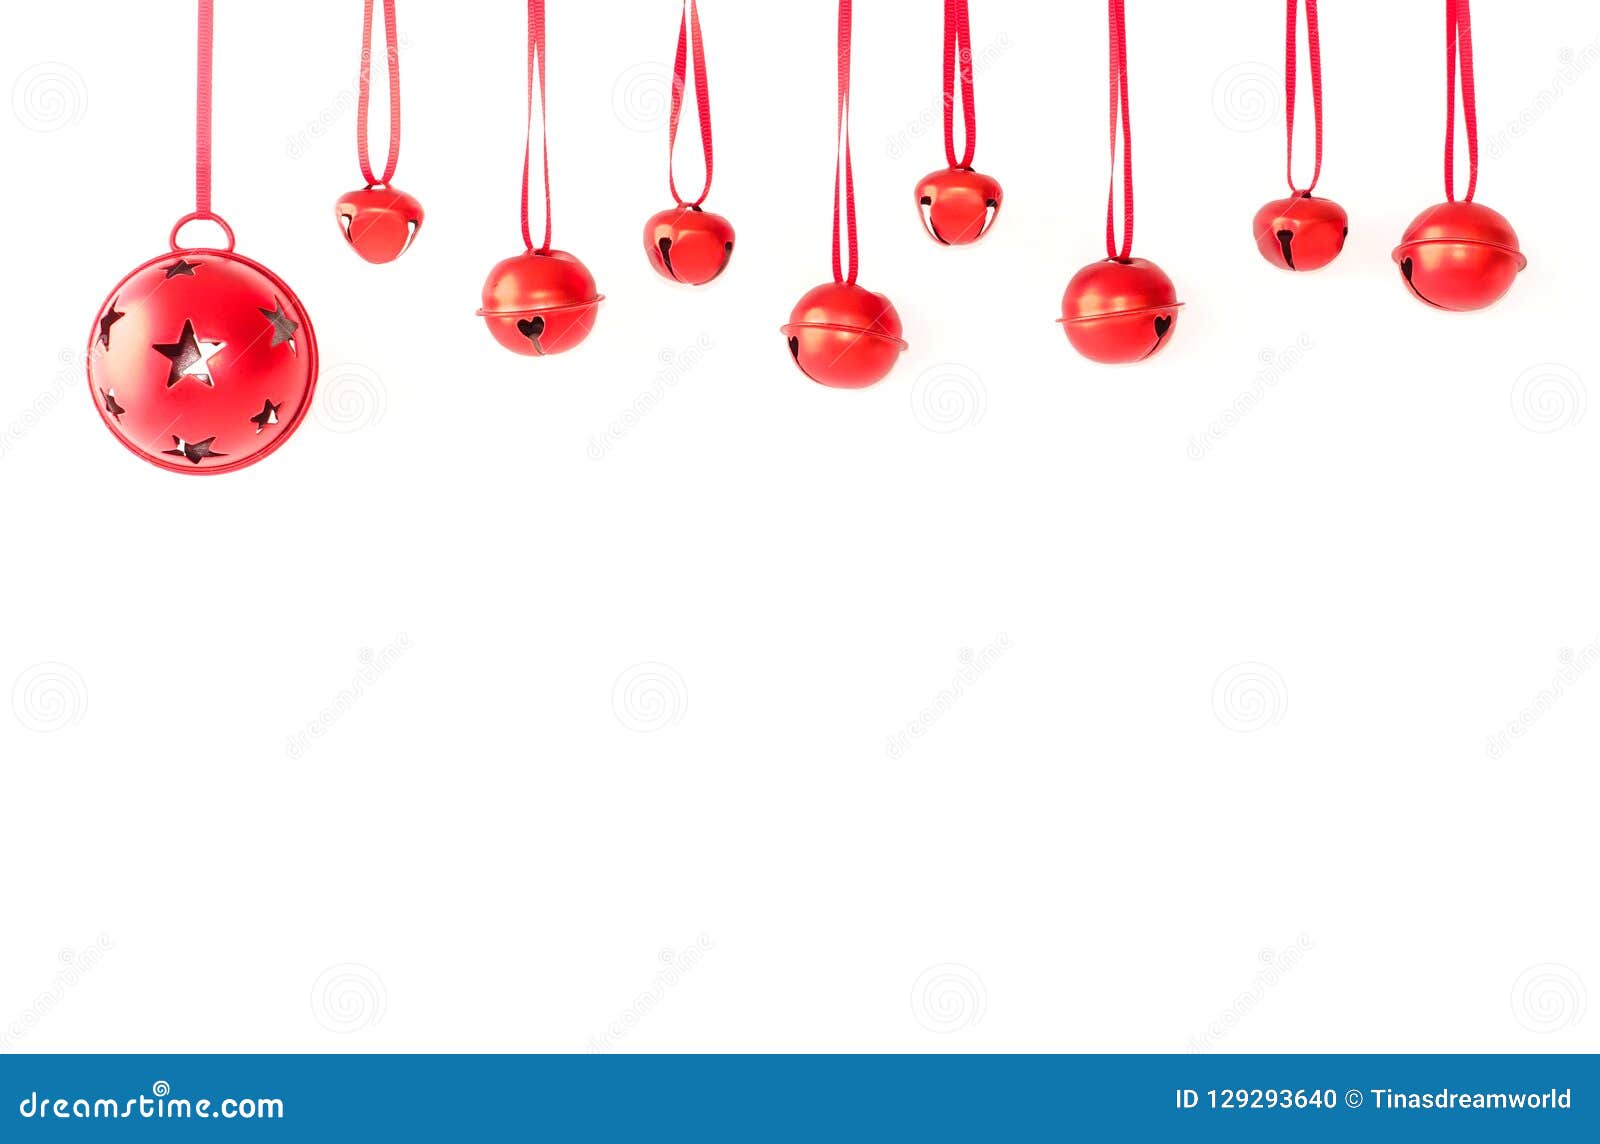 jingle bells with ribbon hanging in front of white background